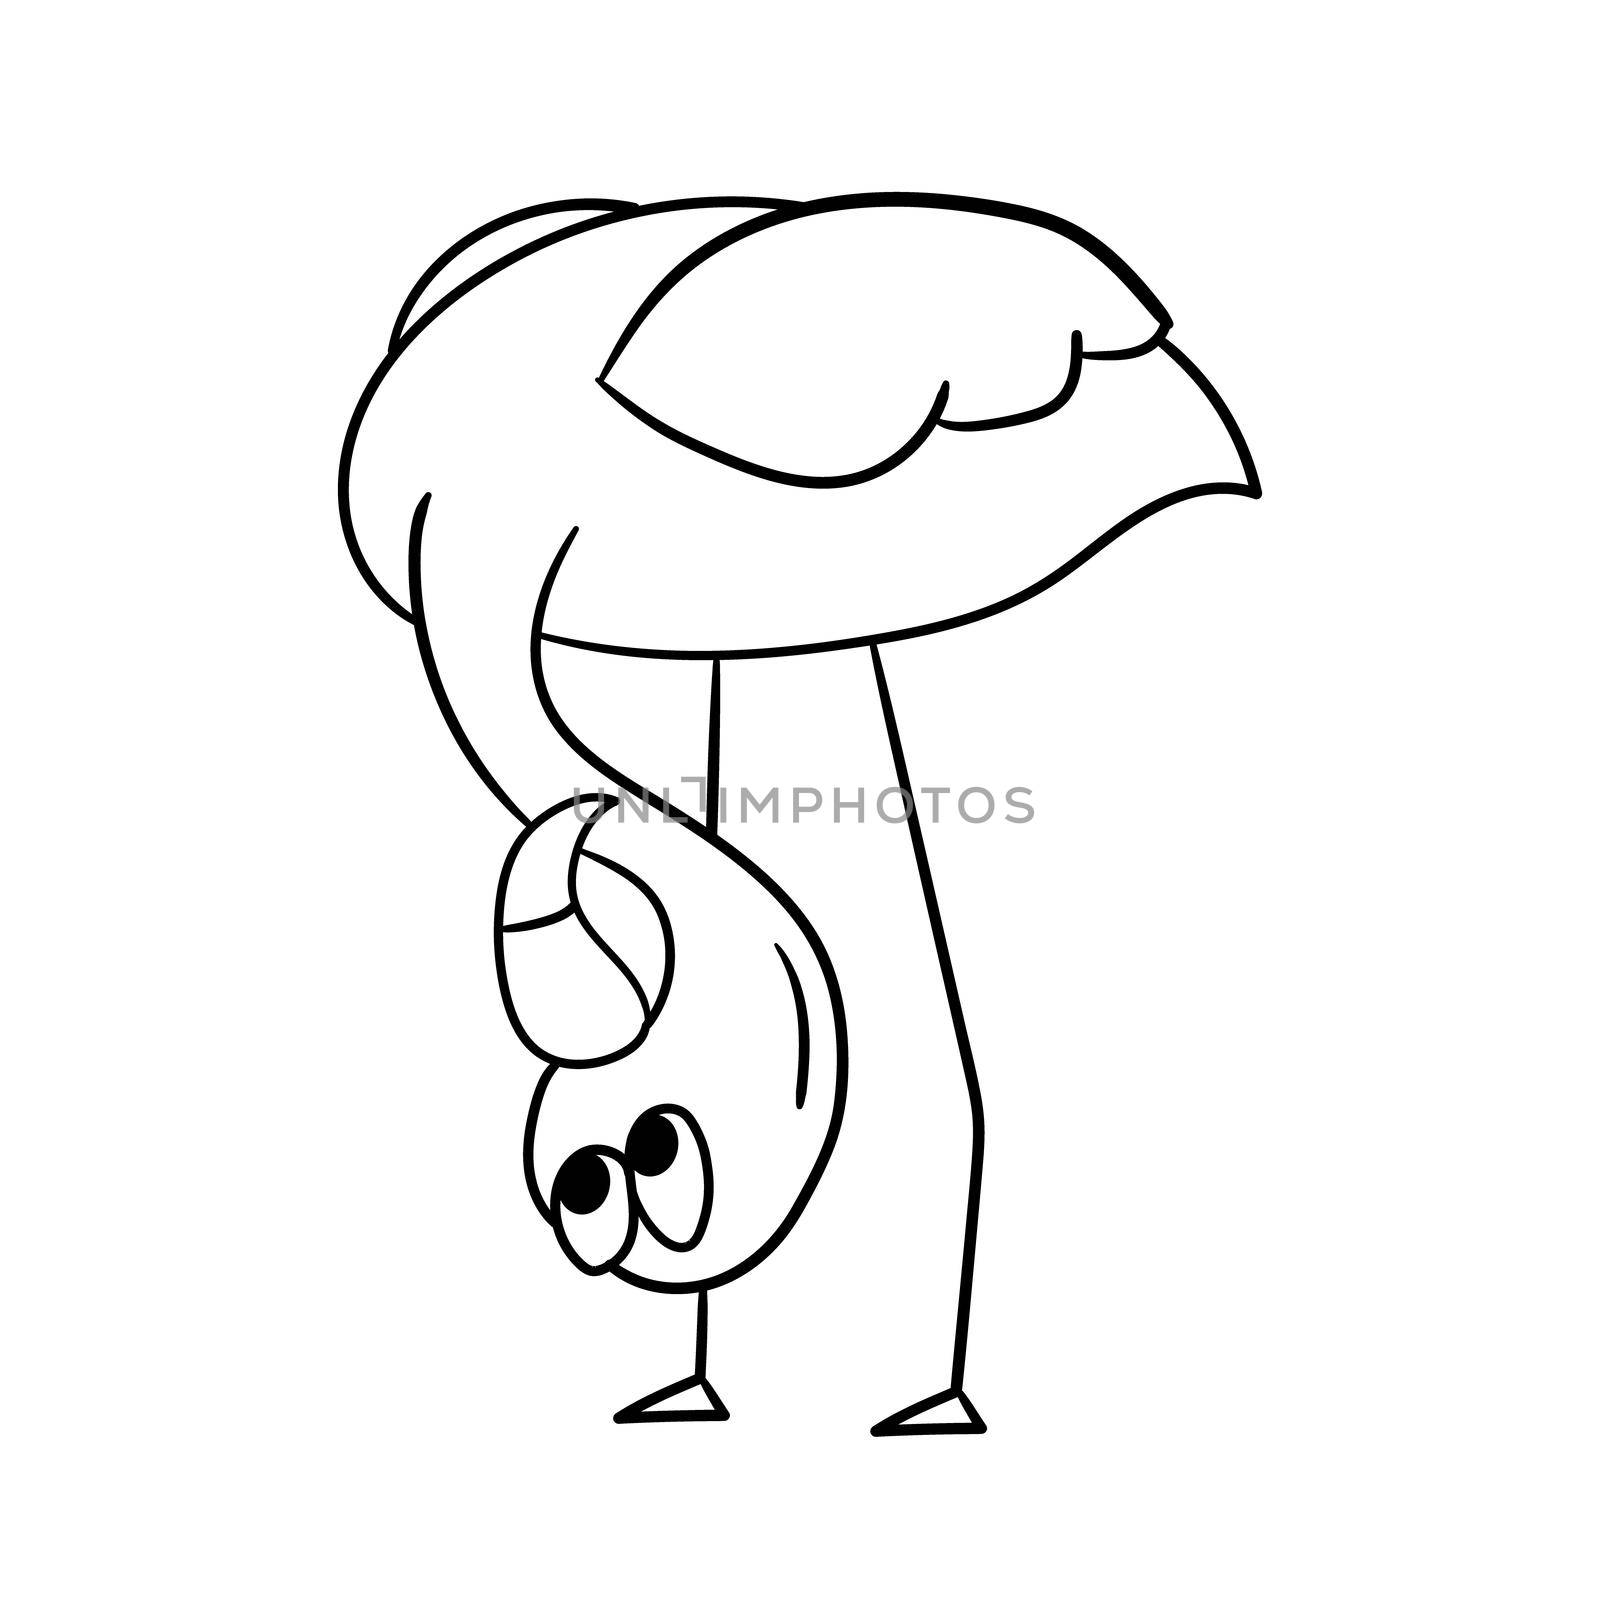 Cute cartoon flamingo with upside down head. Hand drawn style. Coloring Page by natali_brill